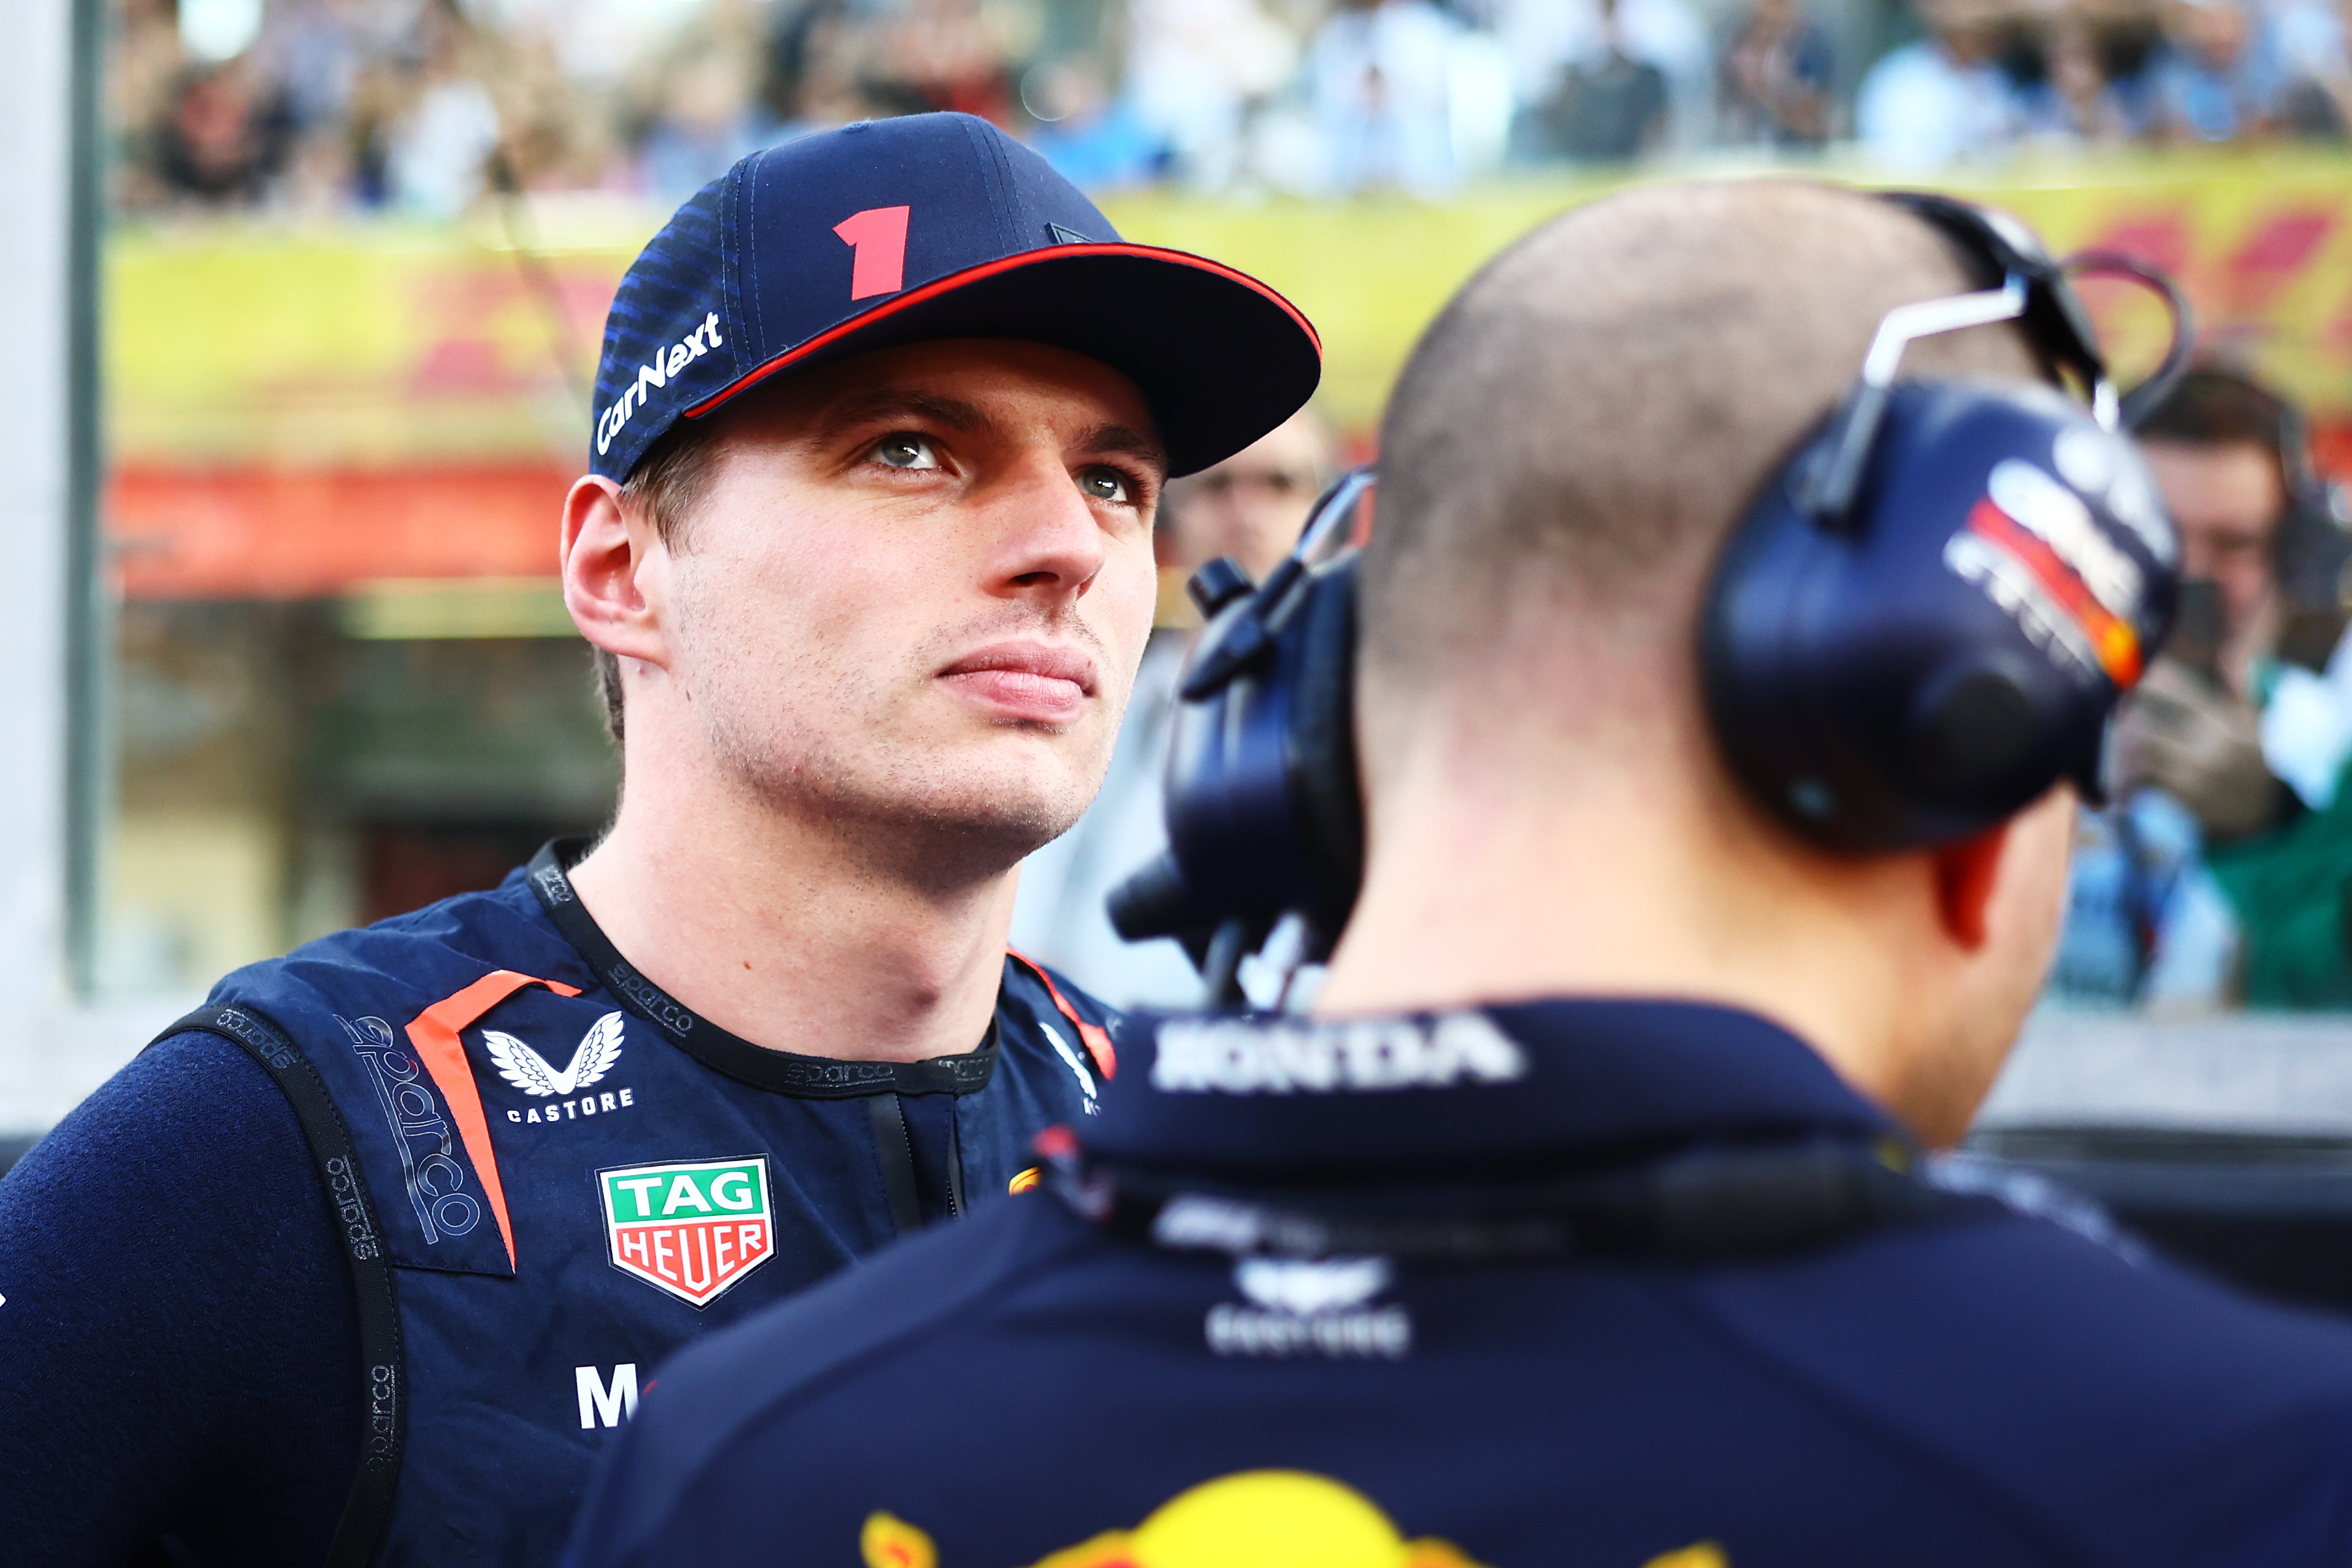 Fernando Alonso wants to team up with Max Verstappen to race at Le